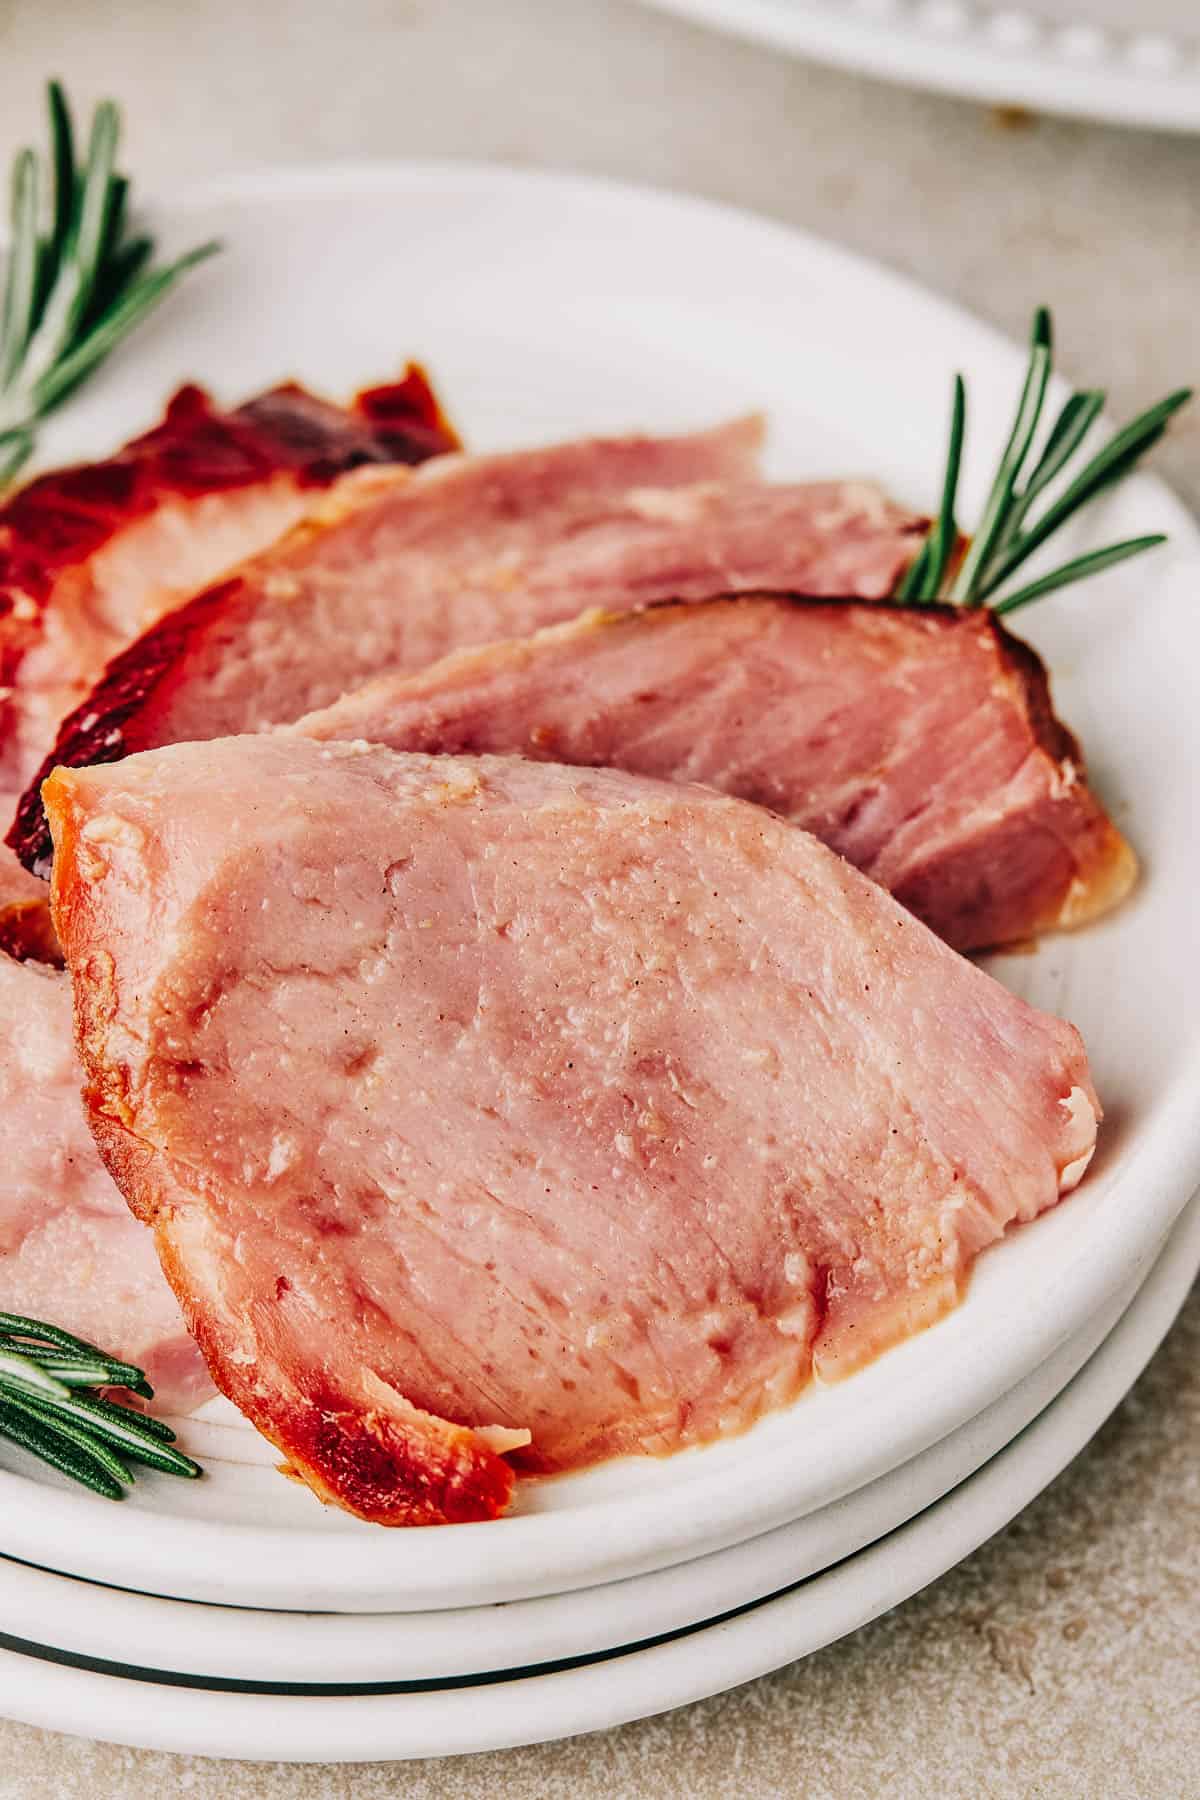 Four slices of ham on a small serving plate, garnished with rosemary. Forks, a cup of glaze, and the platter of ham are nearby on the table.